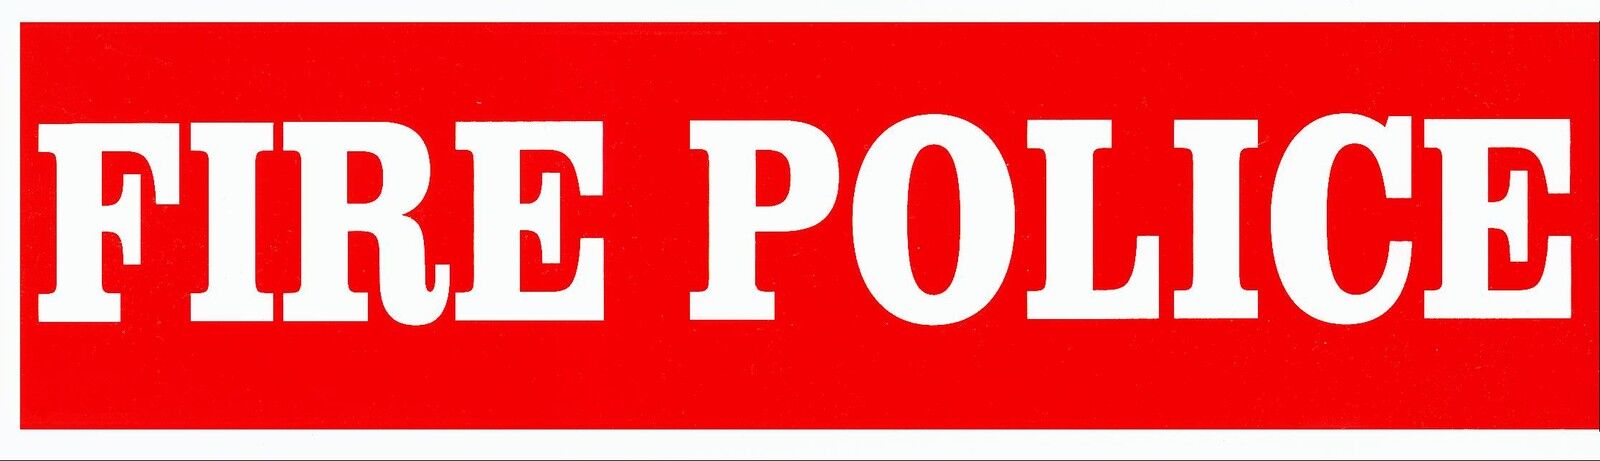 FIRE POLICE Identification Decal/ Sign - White FIRE POLICE on Red Background